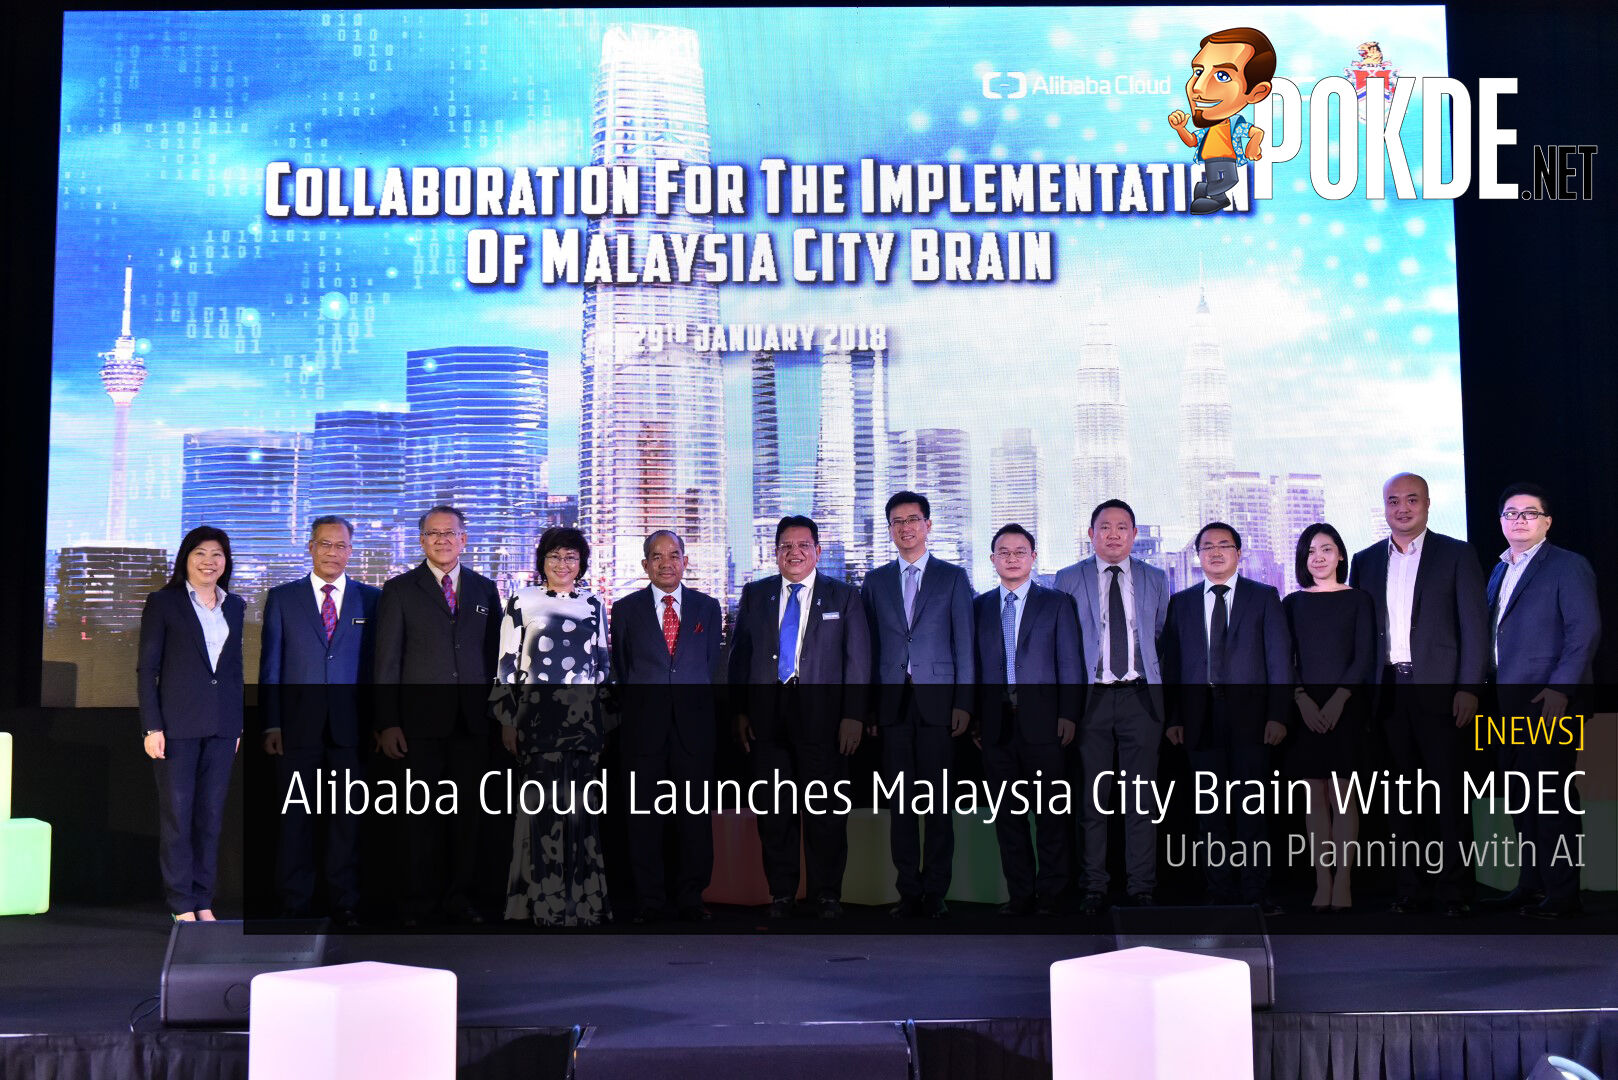 Alibaba Cloud Launches Malaysia City Brain With MDEC - Urban Planning with AI 28